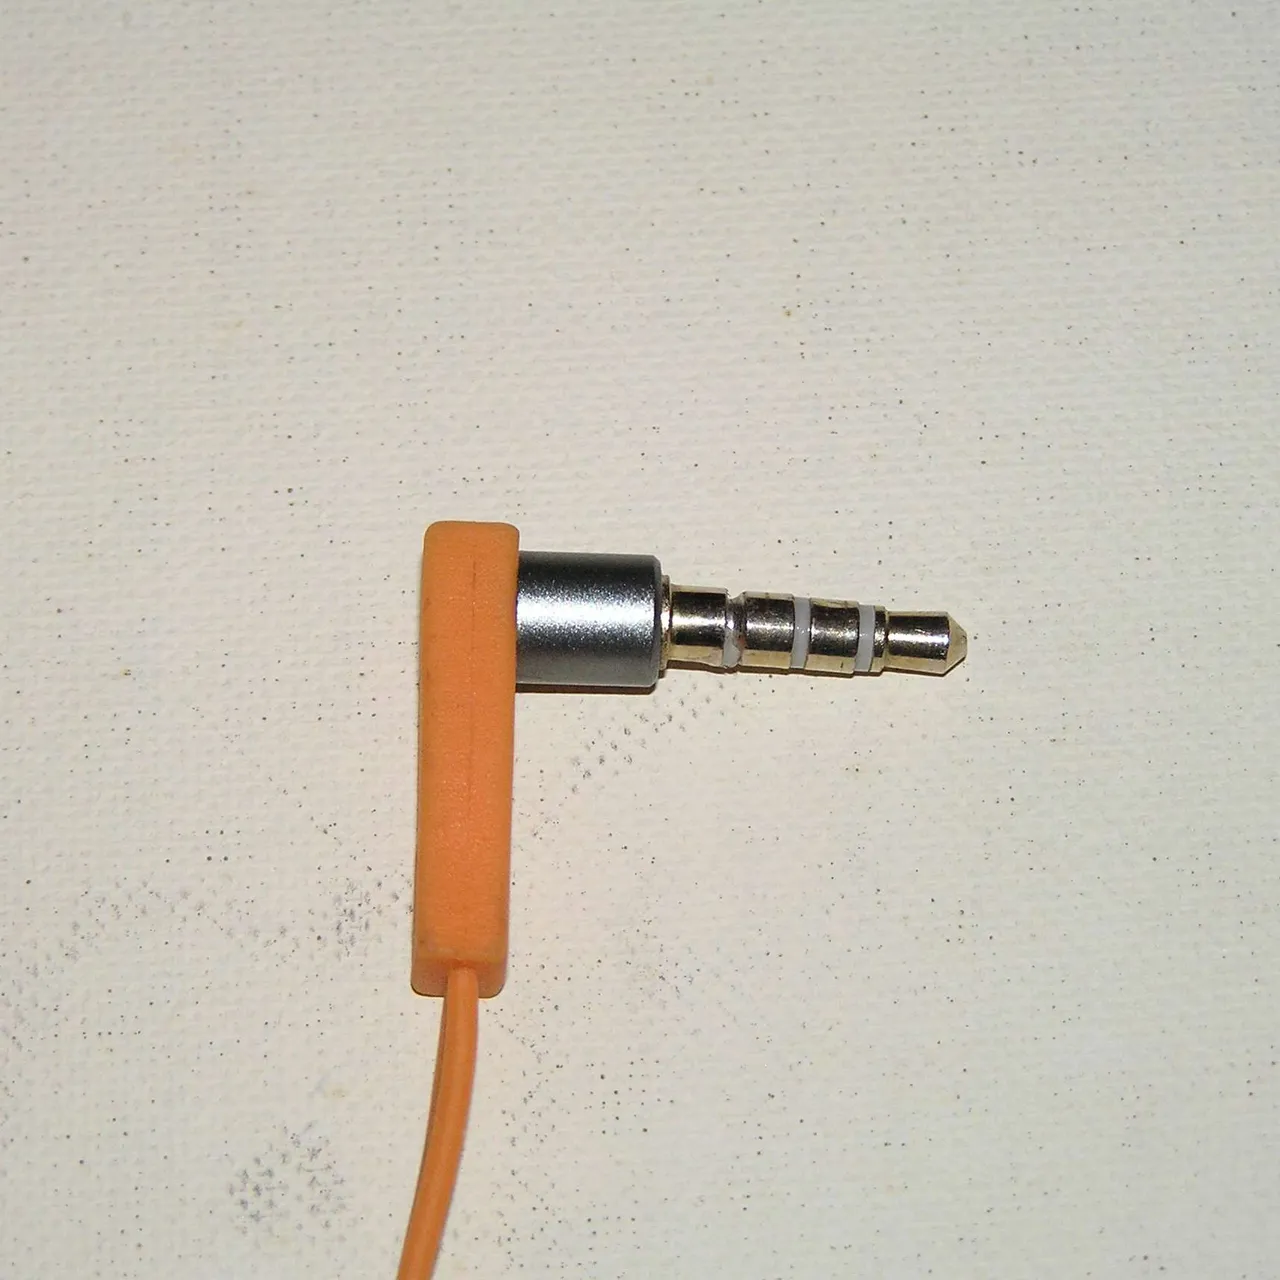 Miscellaneous used earbuds photo 4